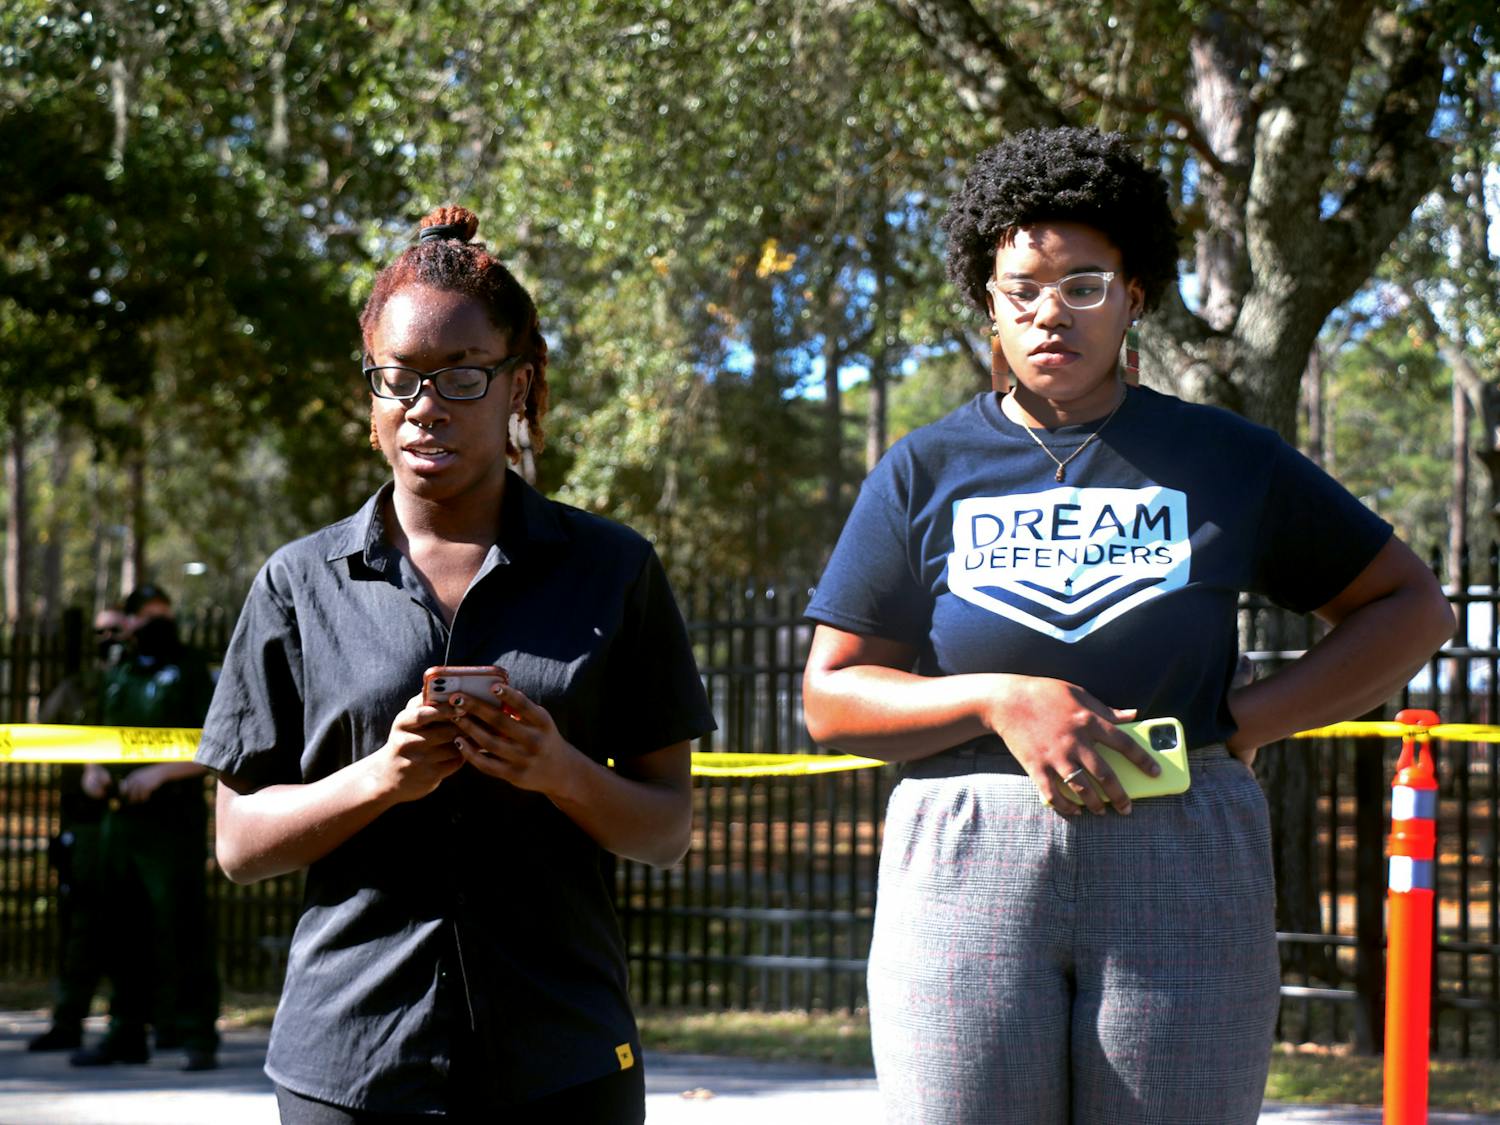 Jada Davis (left), transformative justice co-lead, and Kiara Laurent (right), digital communications coordinator, unveil Dream Defenders' demands at the Alachua County Jail. The organization gave Sheriff Clovis Watson 12 days to respond, which is how long they say Erica Thompson's cries for help were ignored.